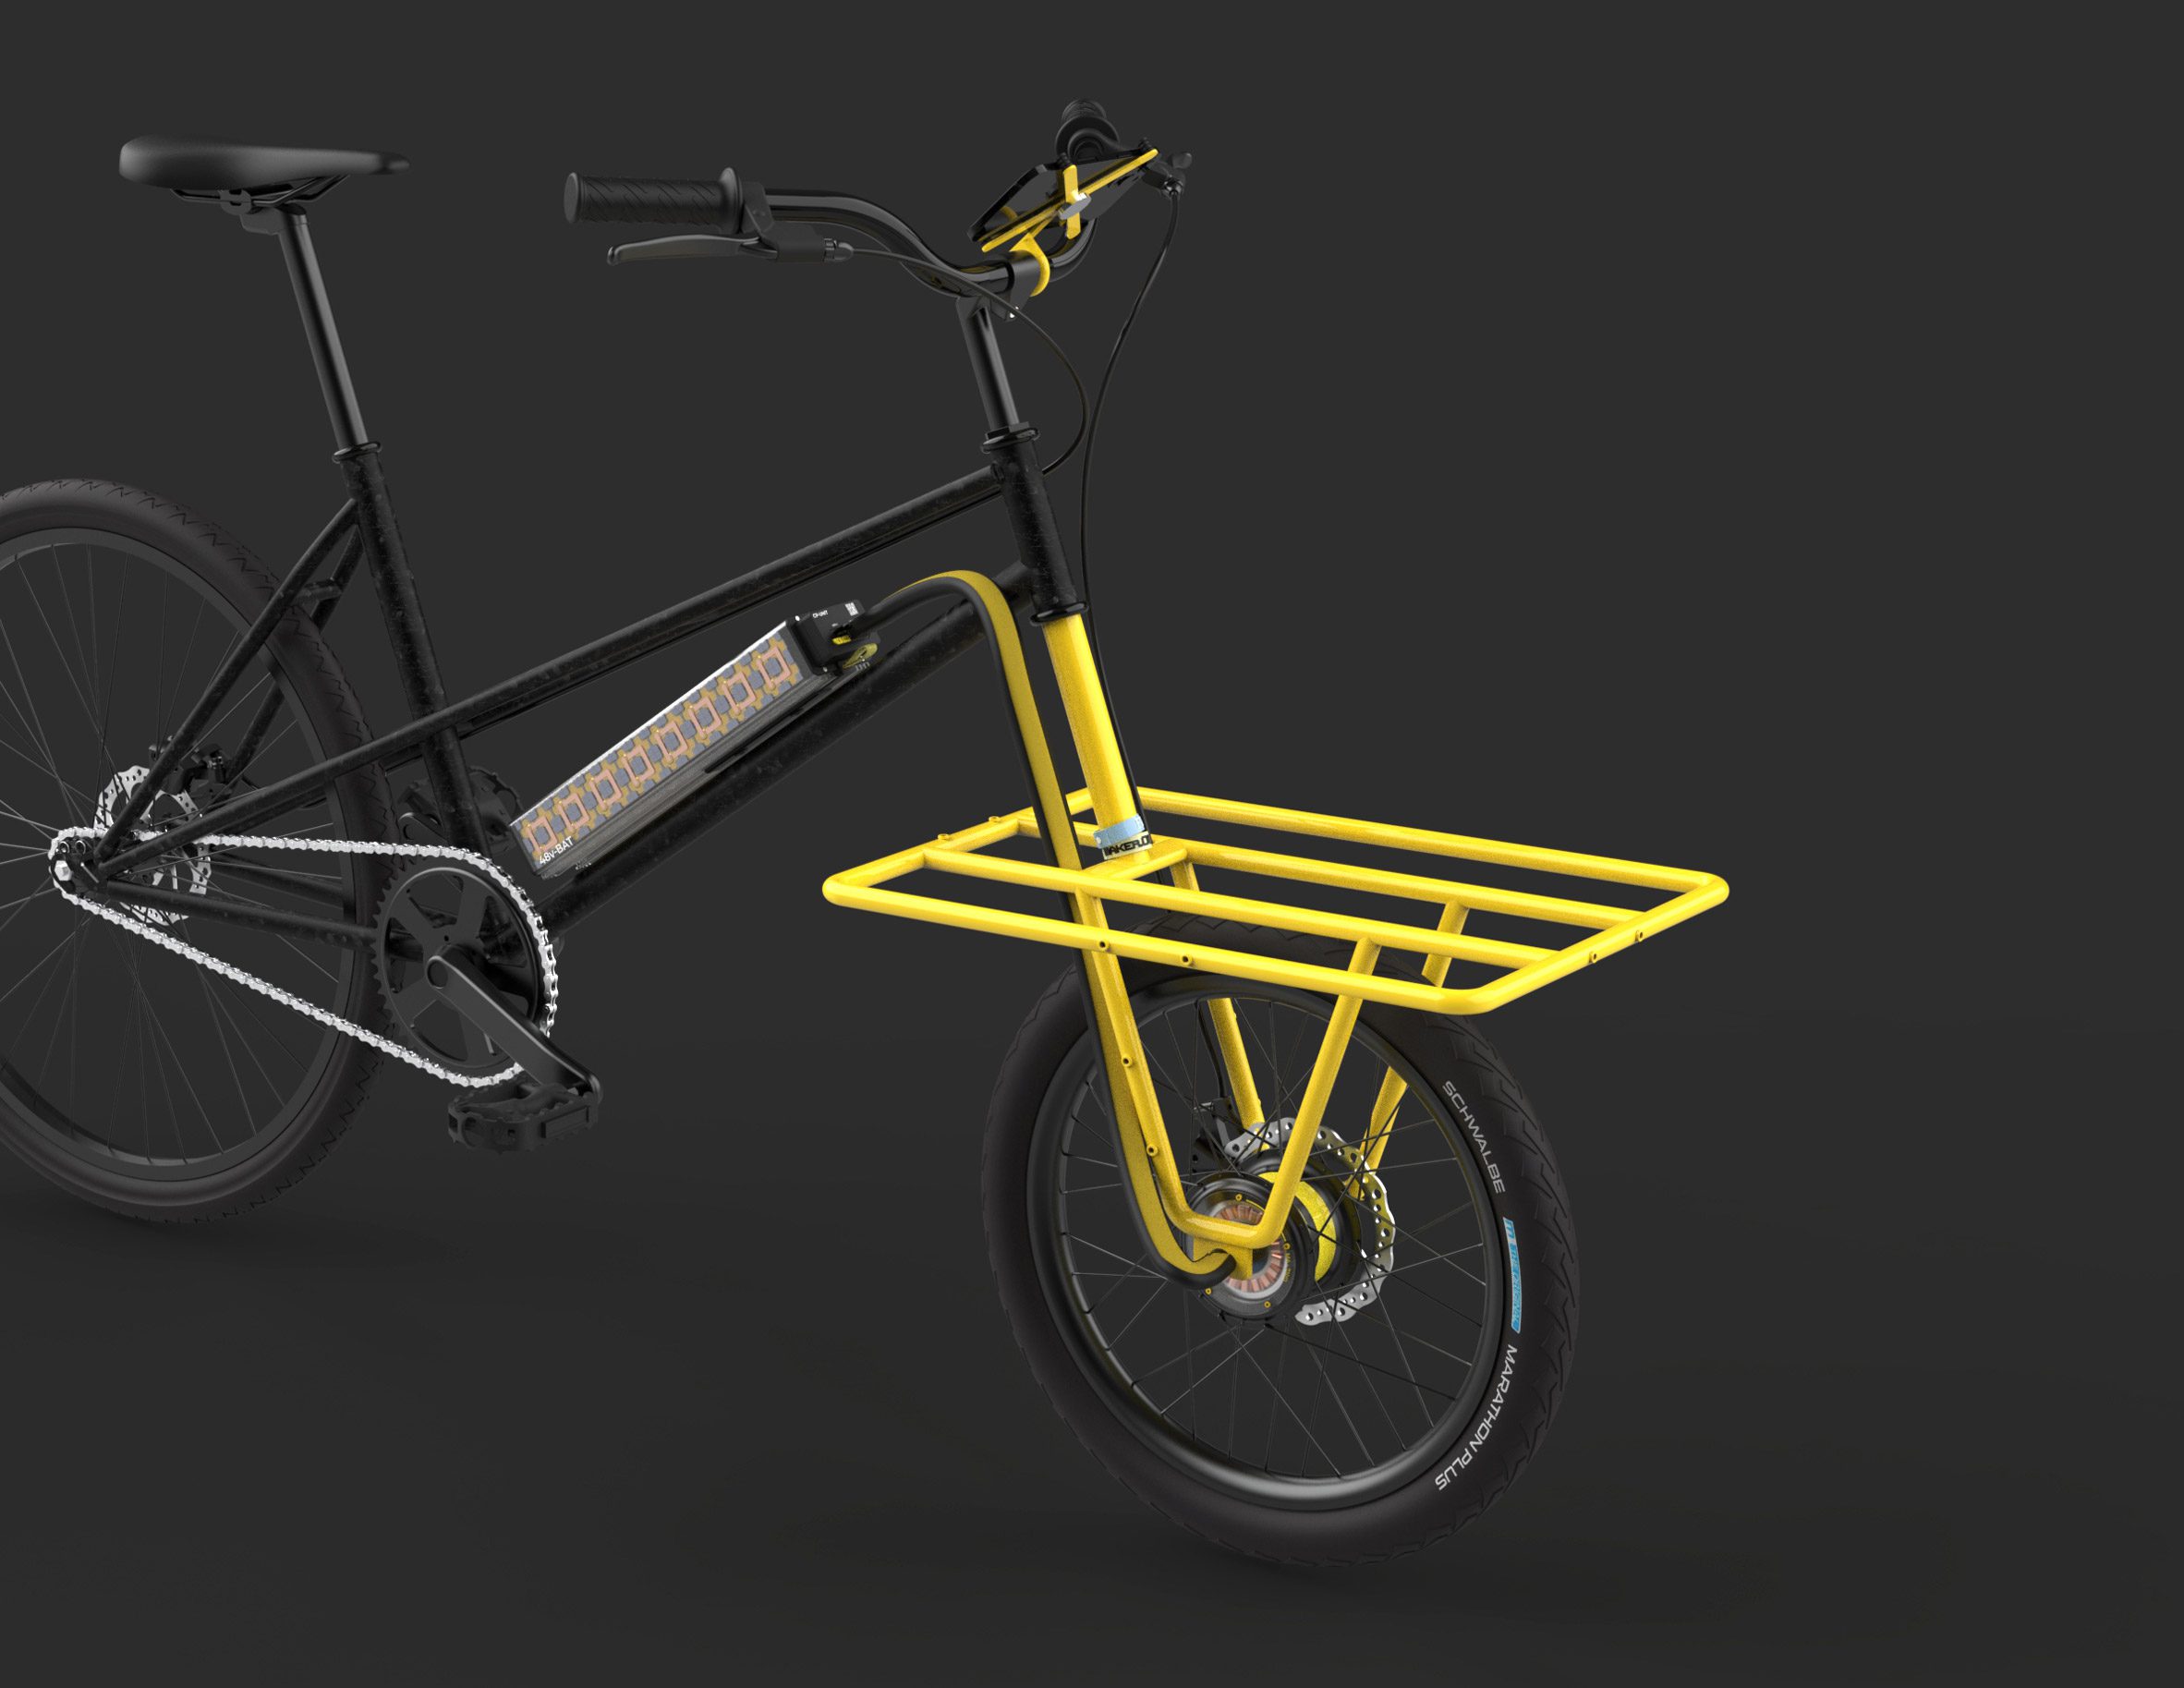 Bicycle with yellow front piece on black background